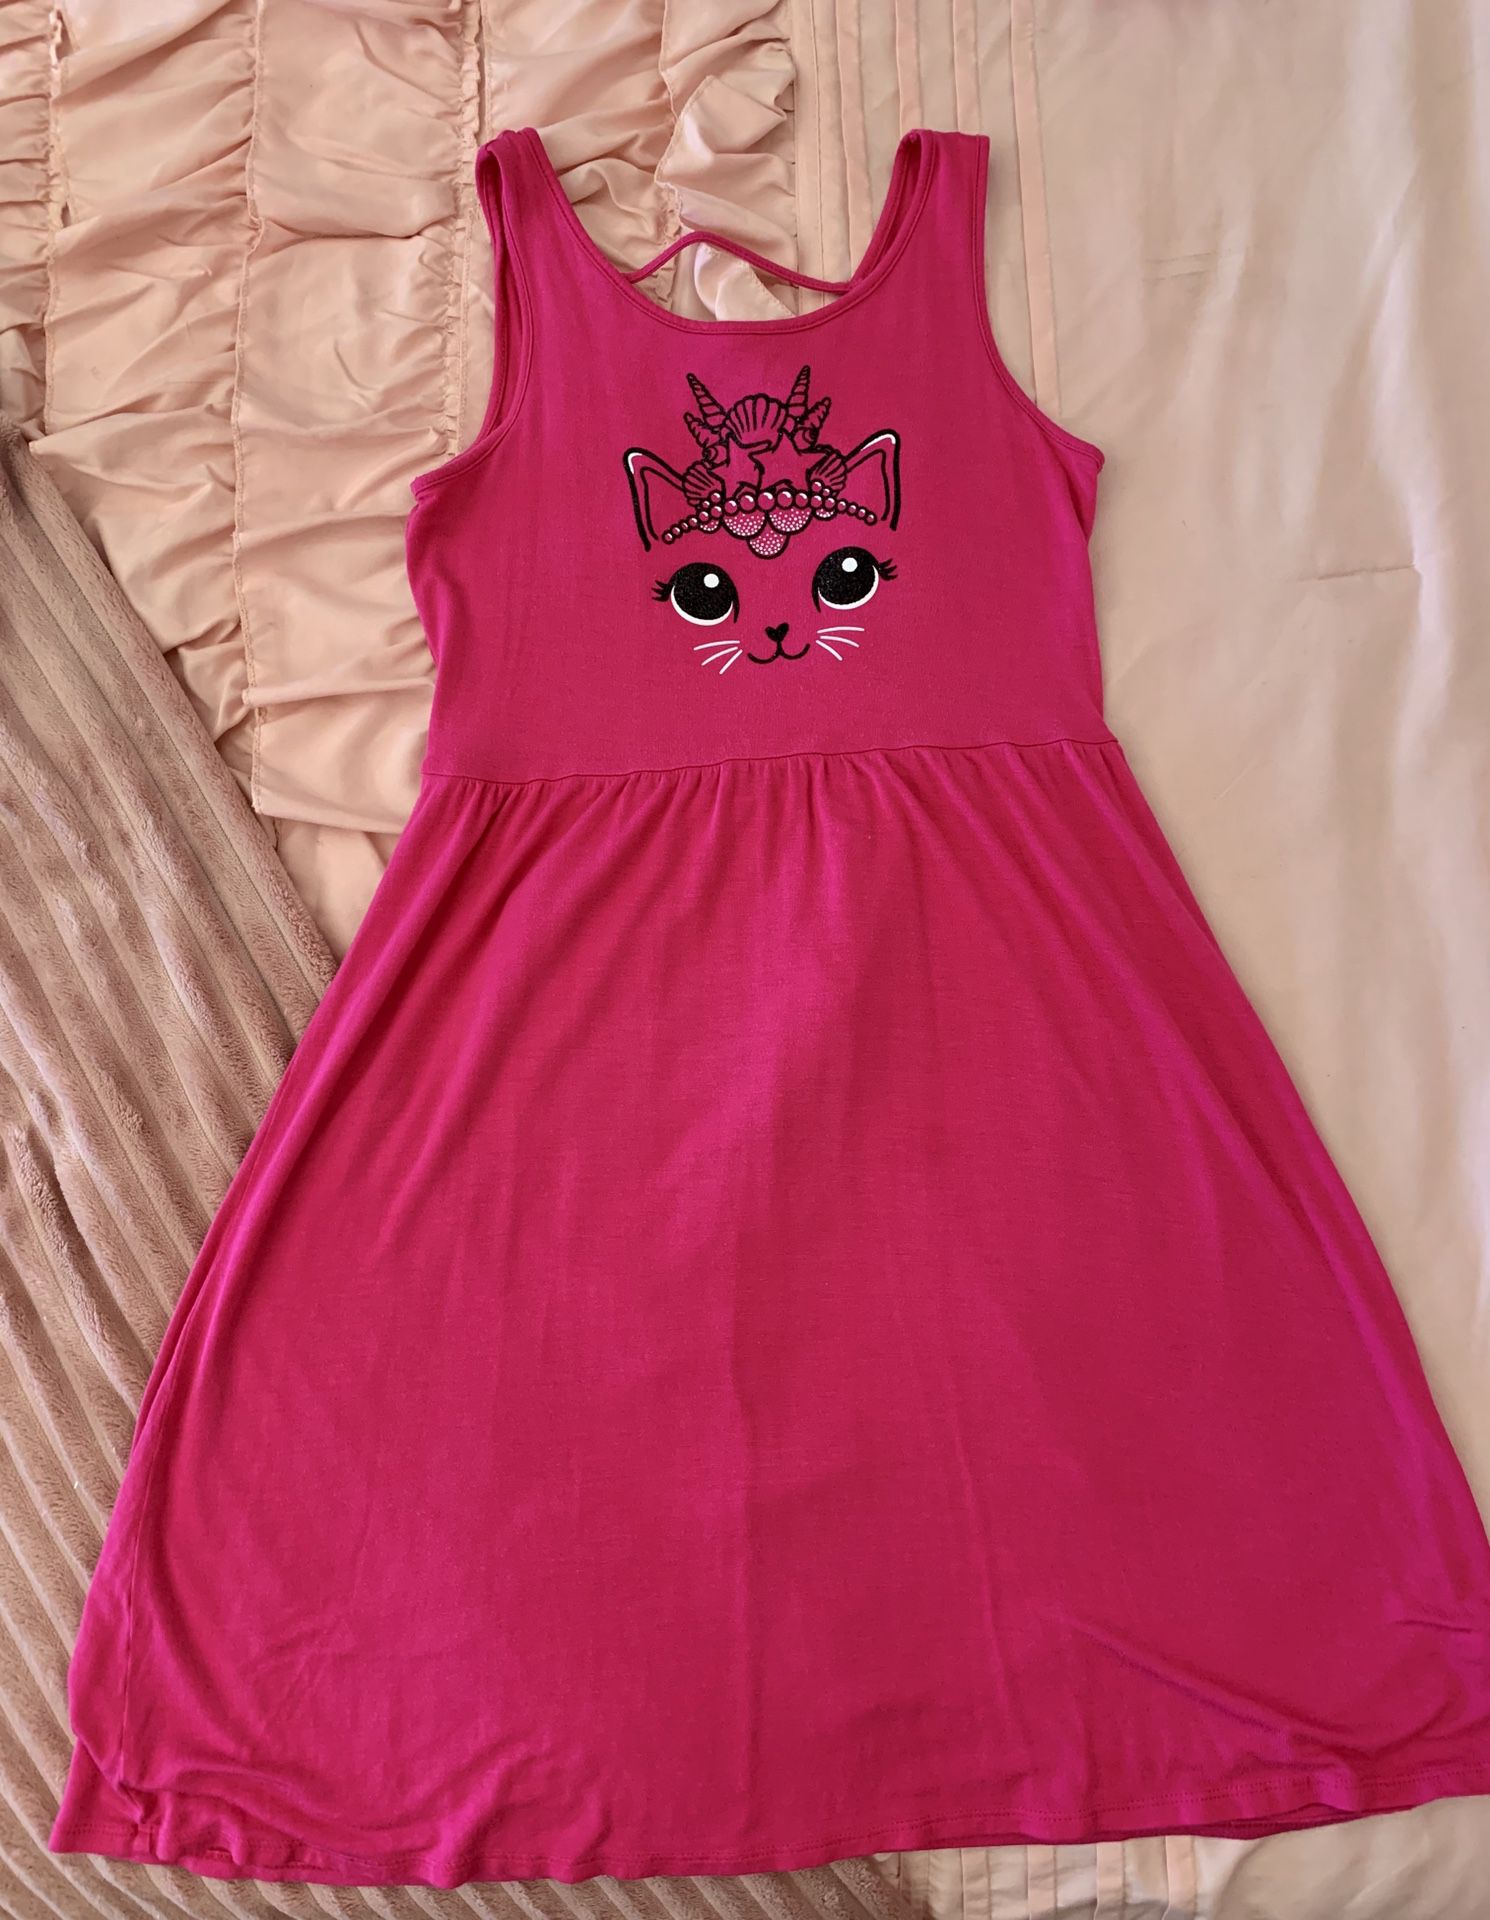 Girl’s Justice Jersey pink Dress